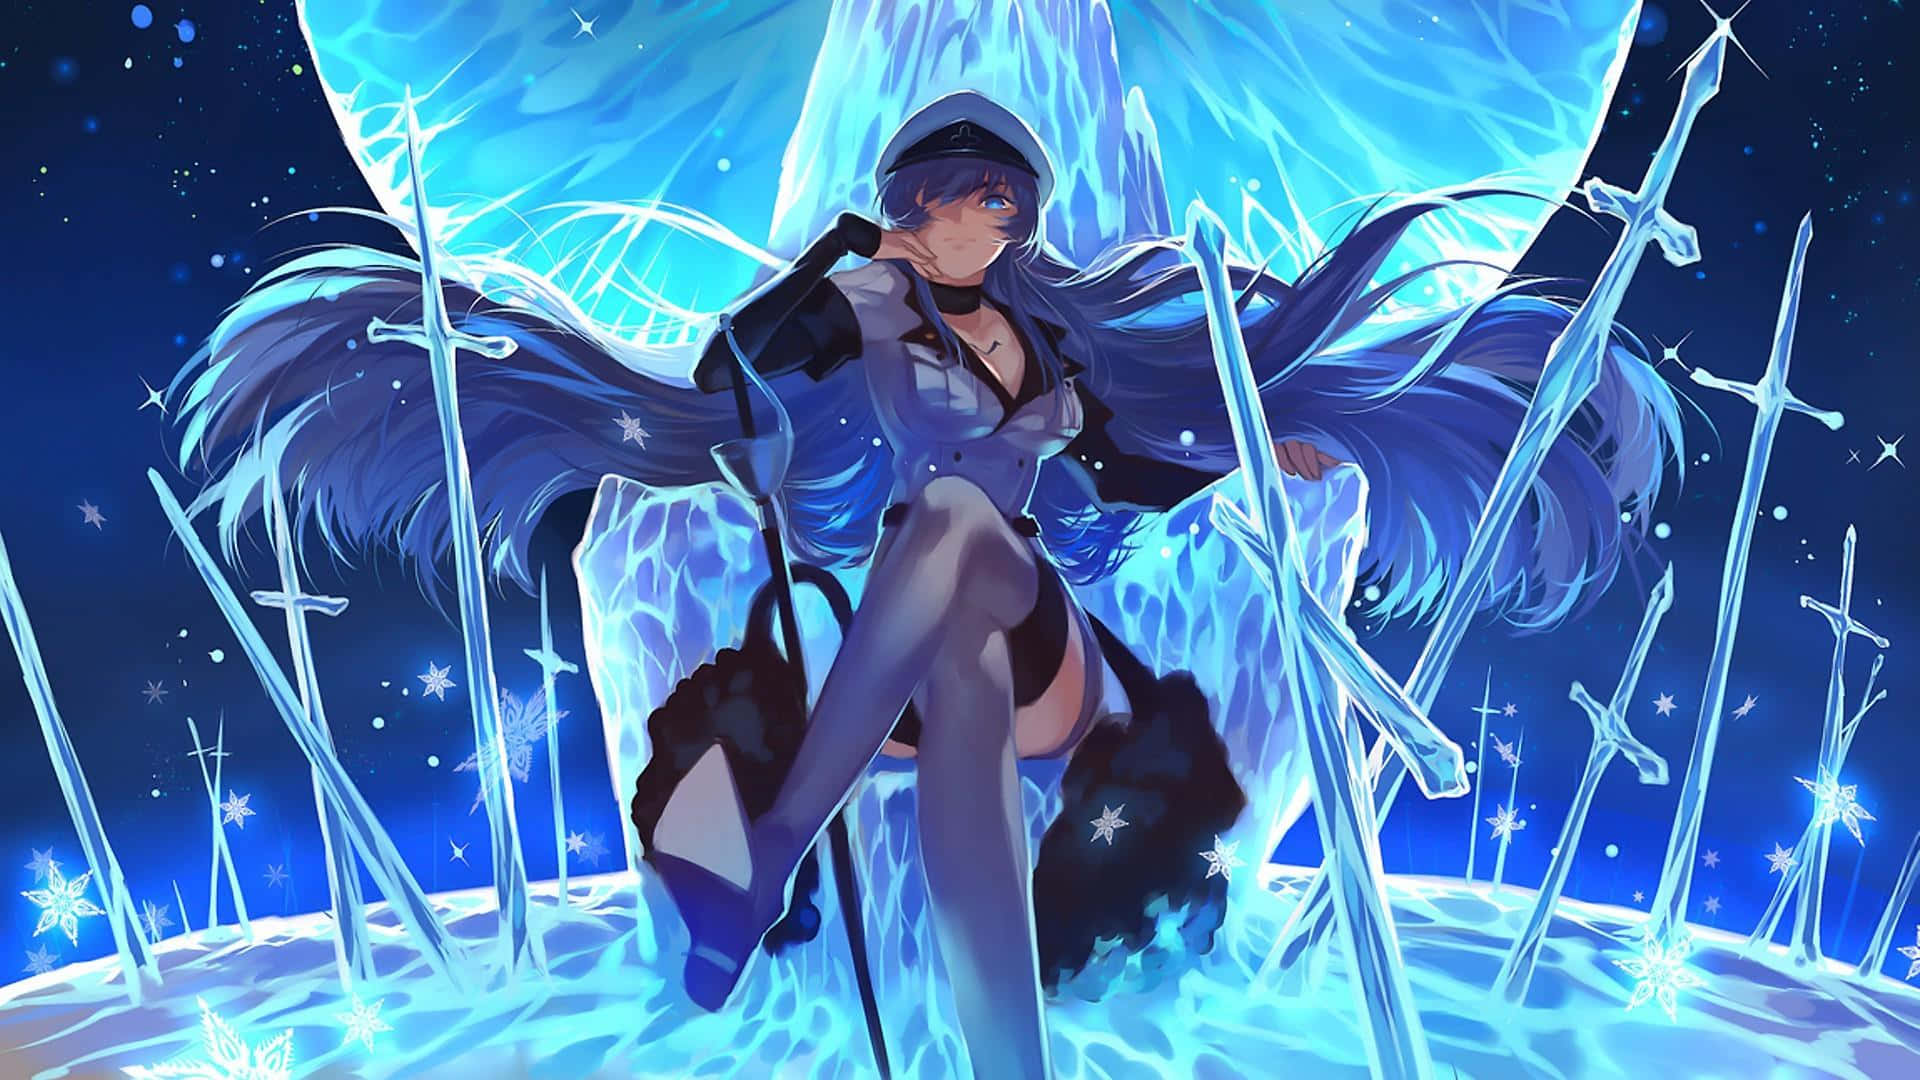 A Girl With Swords Sitting On A Snowy Background